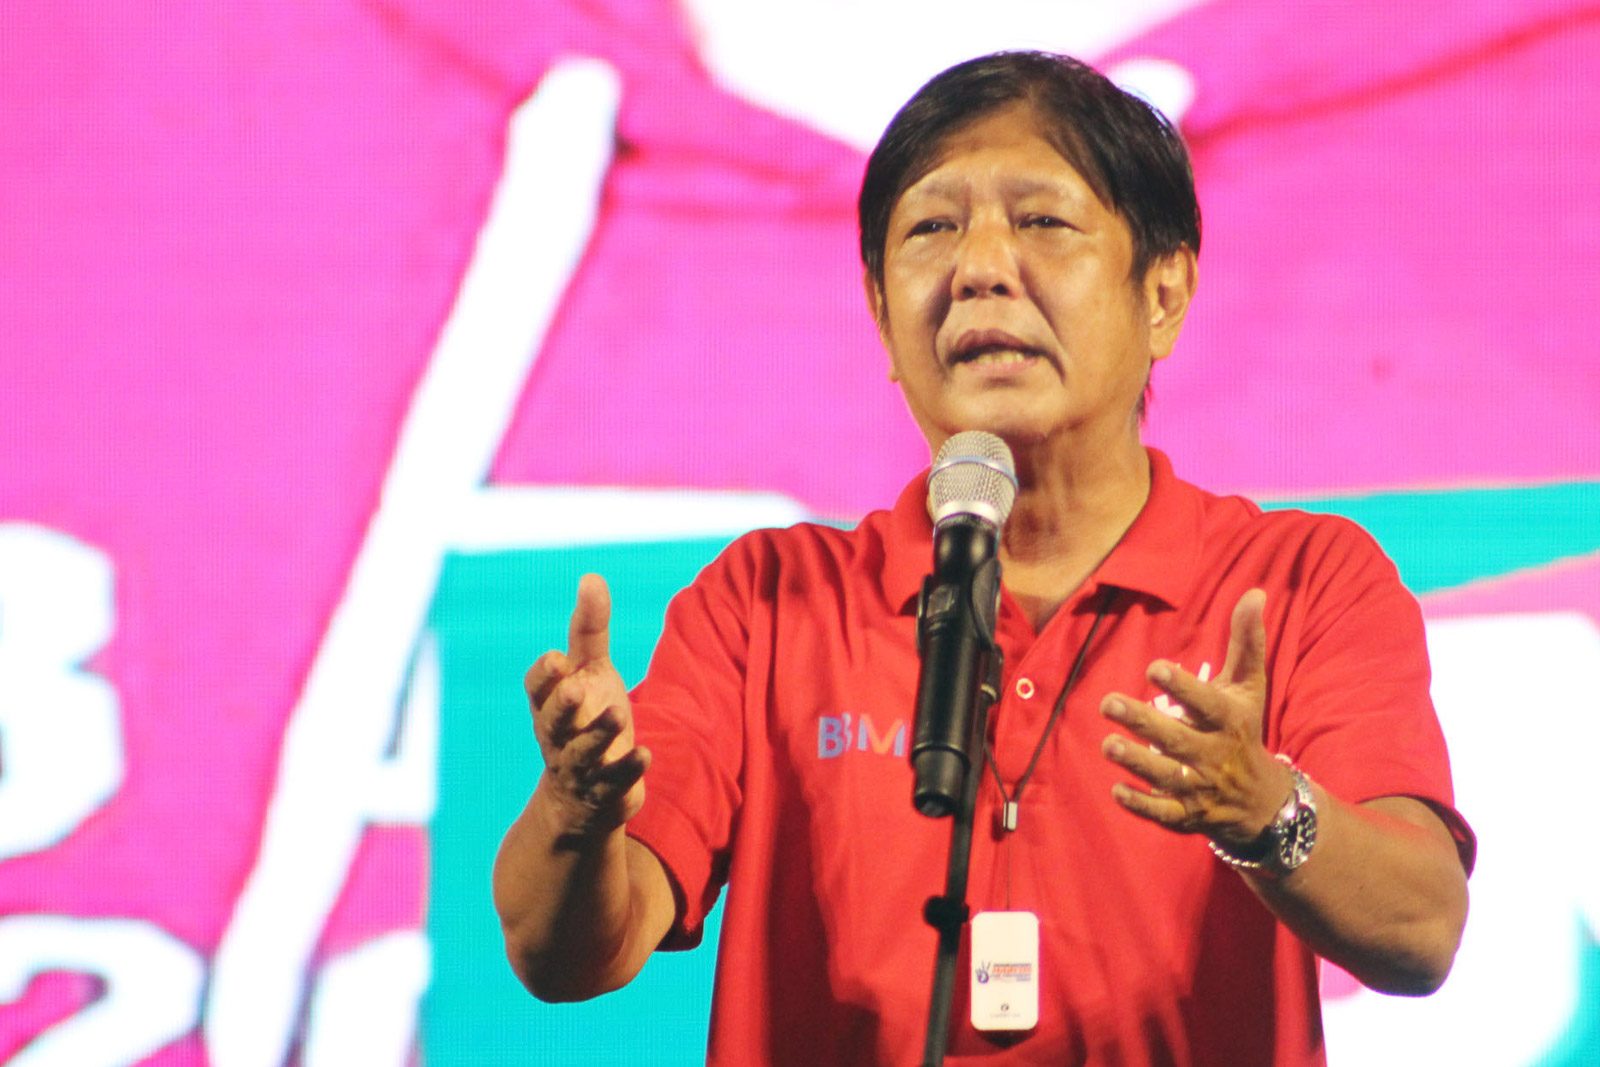 Will Marcos Jr. revive ownership claims of crony businesses?